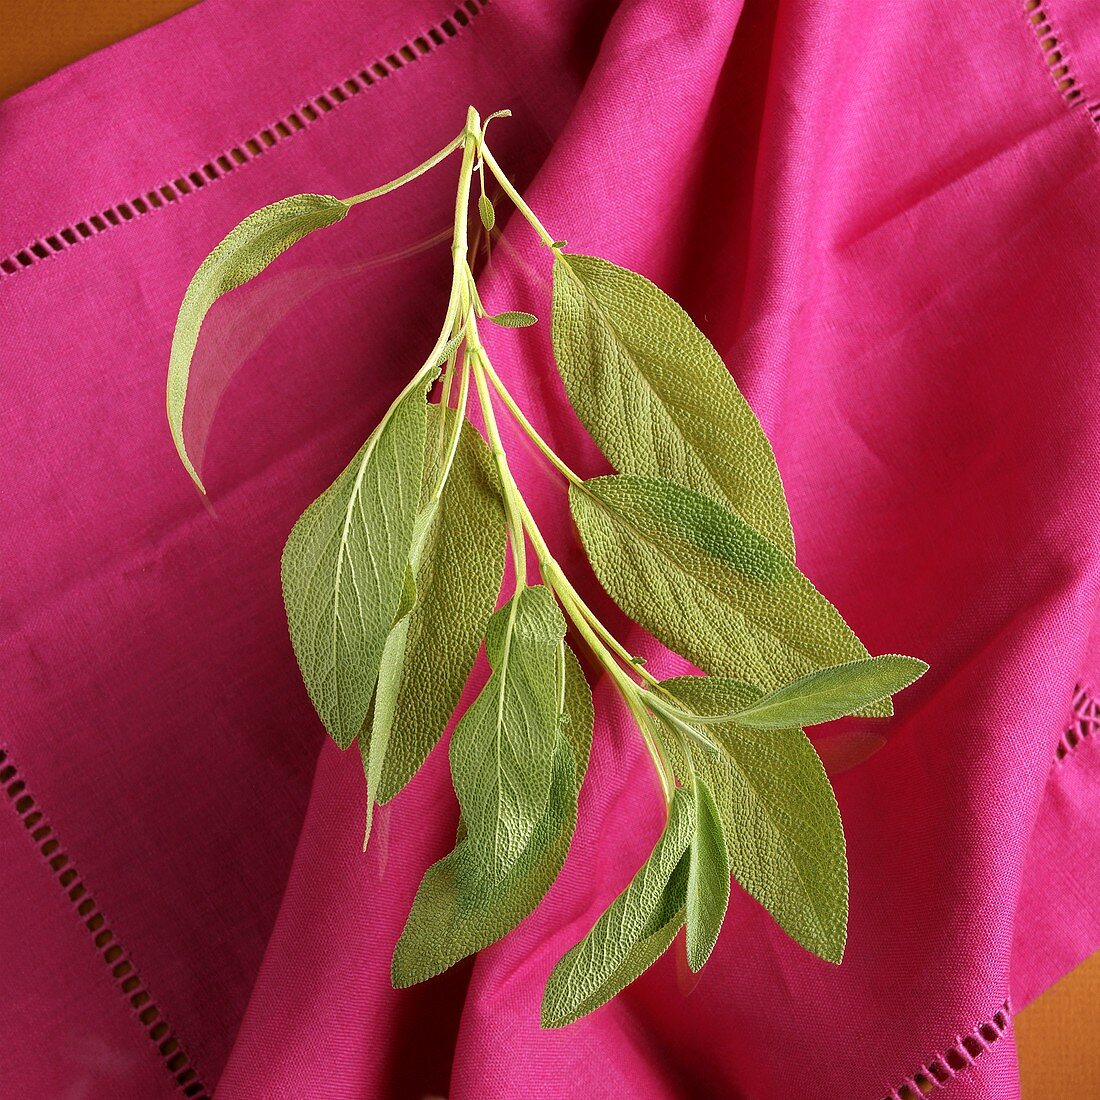 Small Sage Branch with Sage Leaves Over Pink Napkin